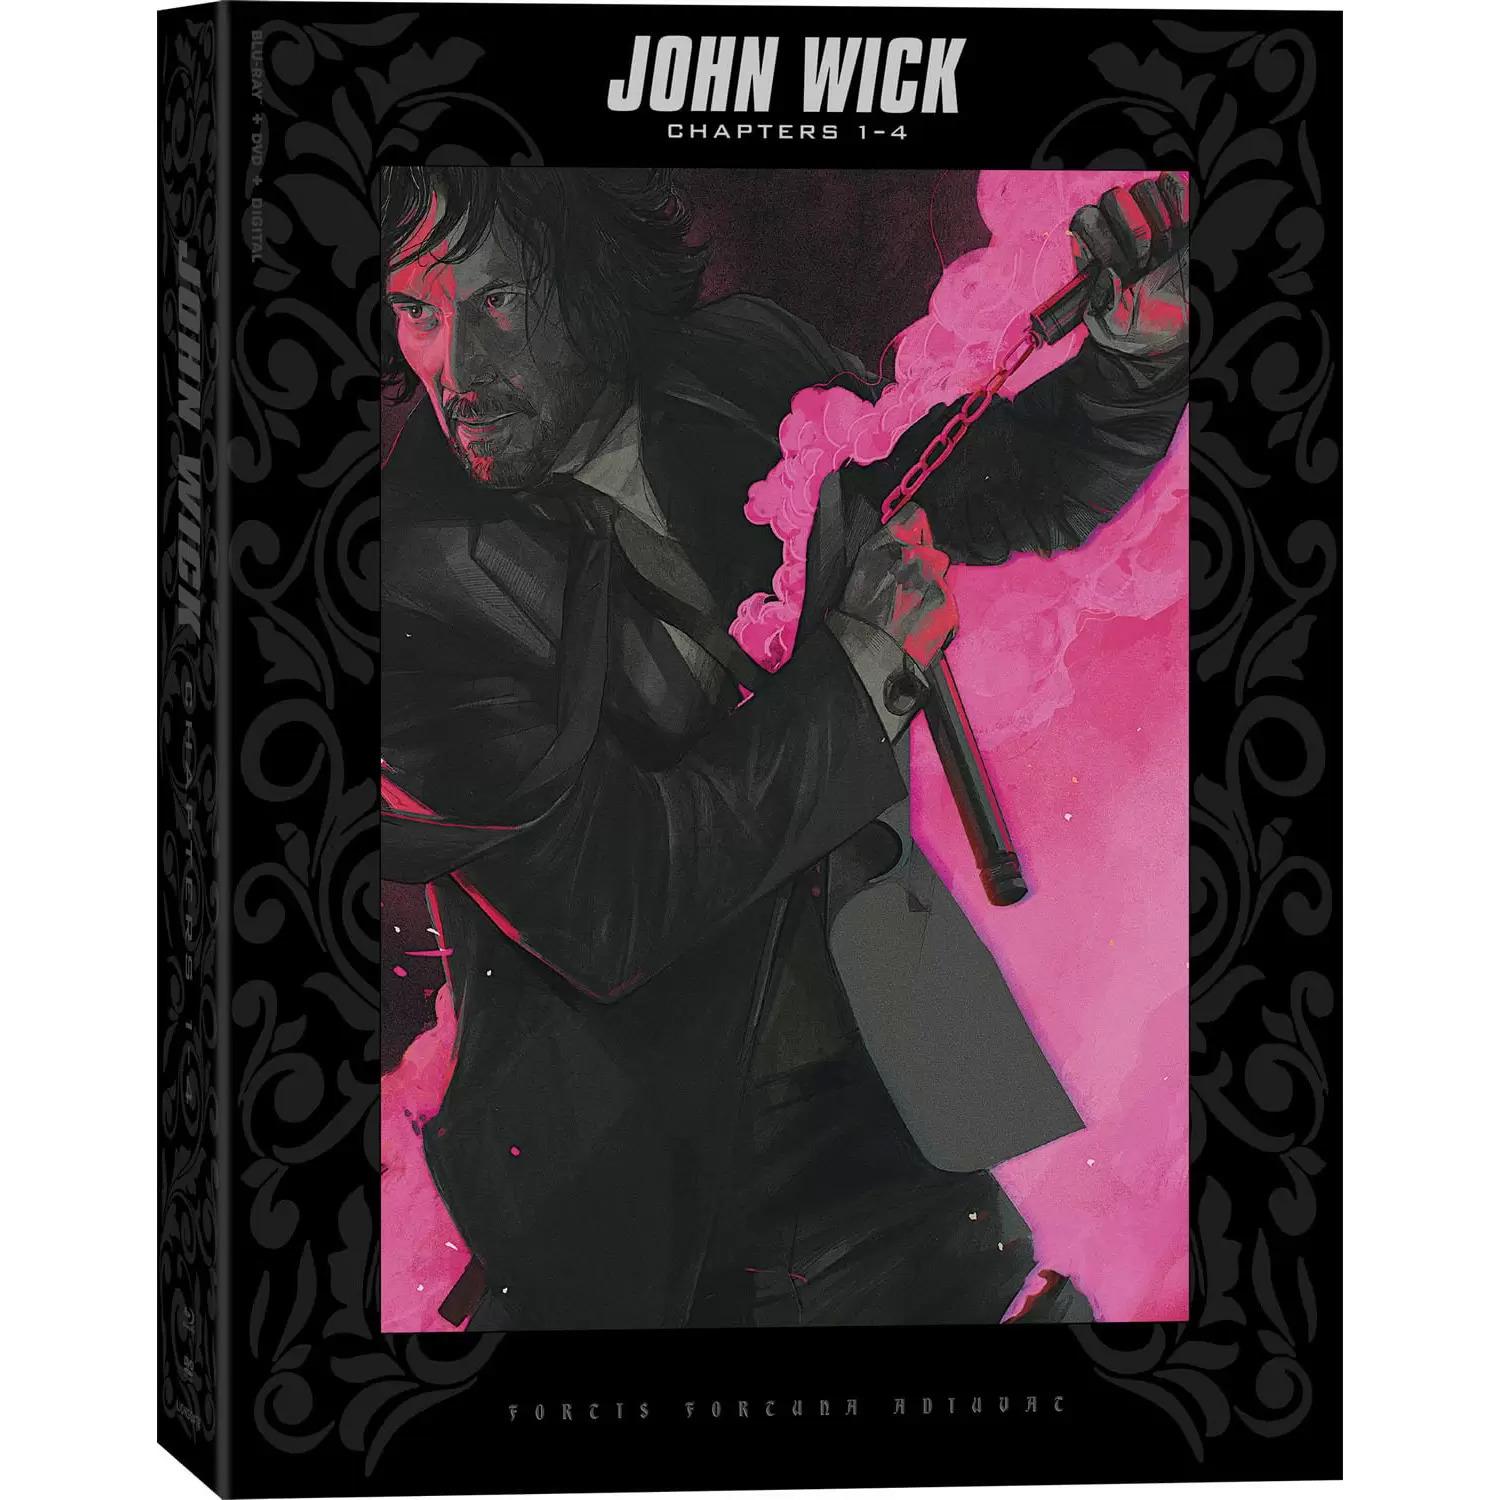 John Wick Chapter 1-4 Collection Blu-ray + DVD for $20.47